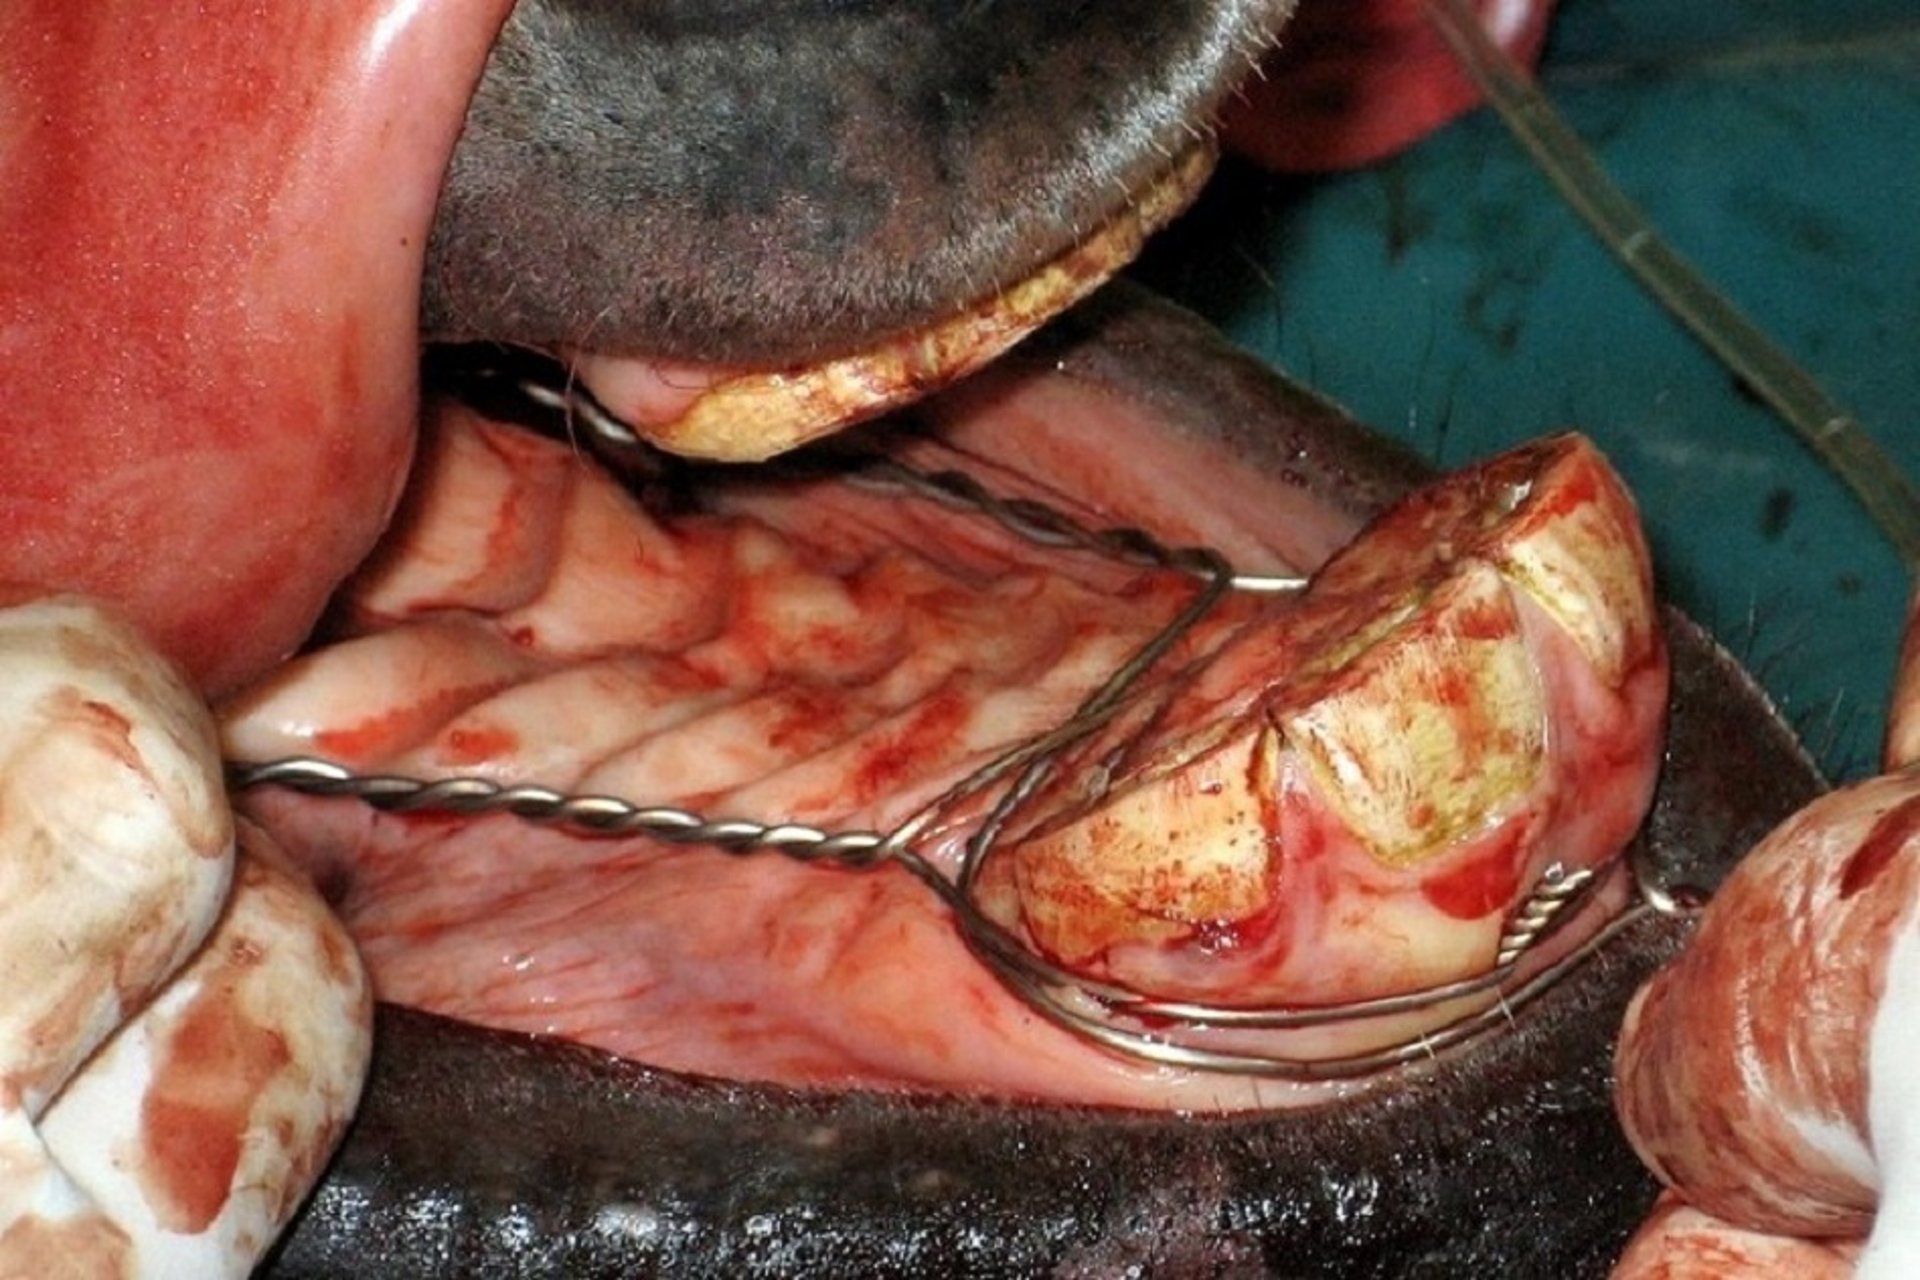 Surgical placement of tension wires, parrot mouth, foal